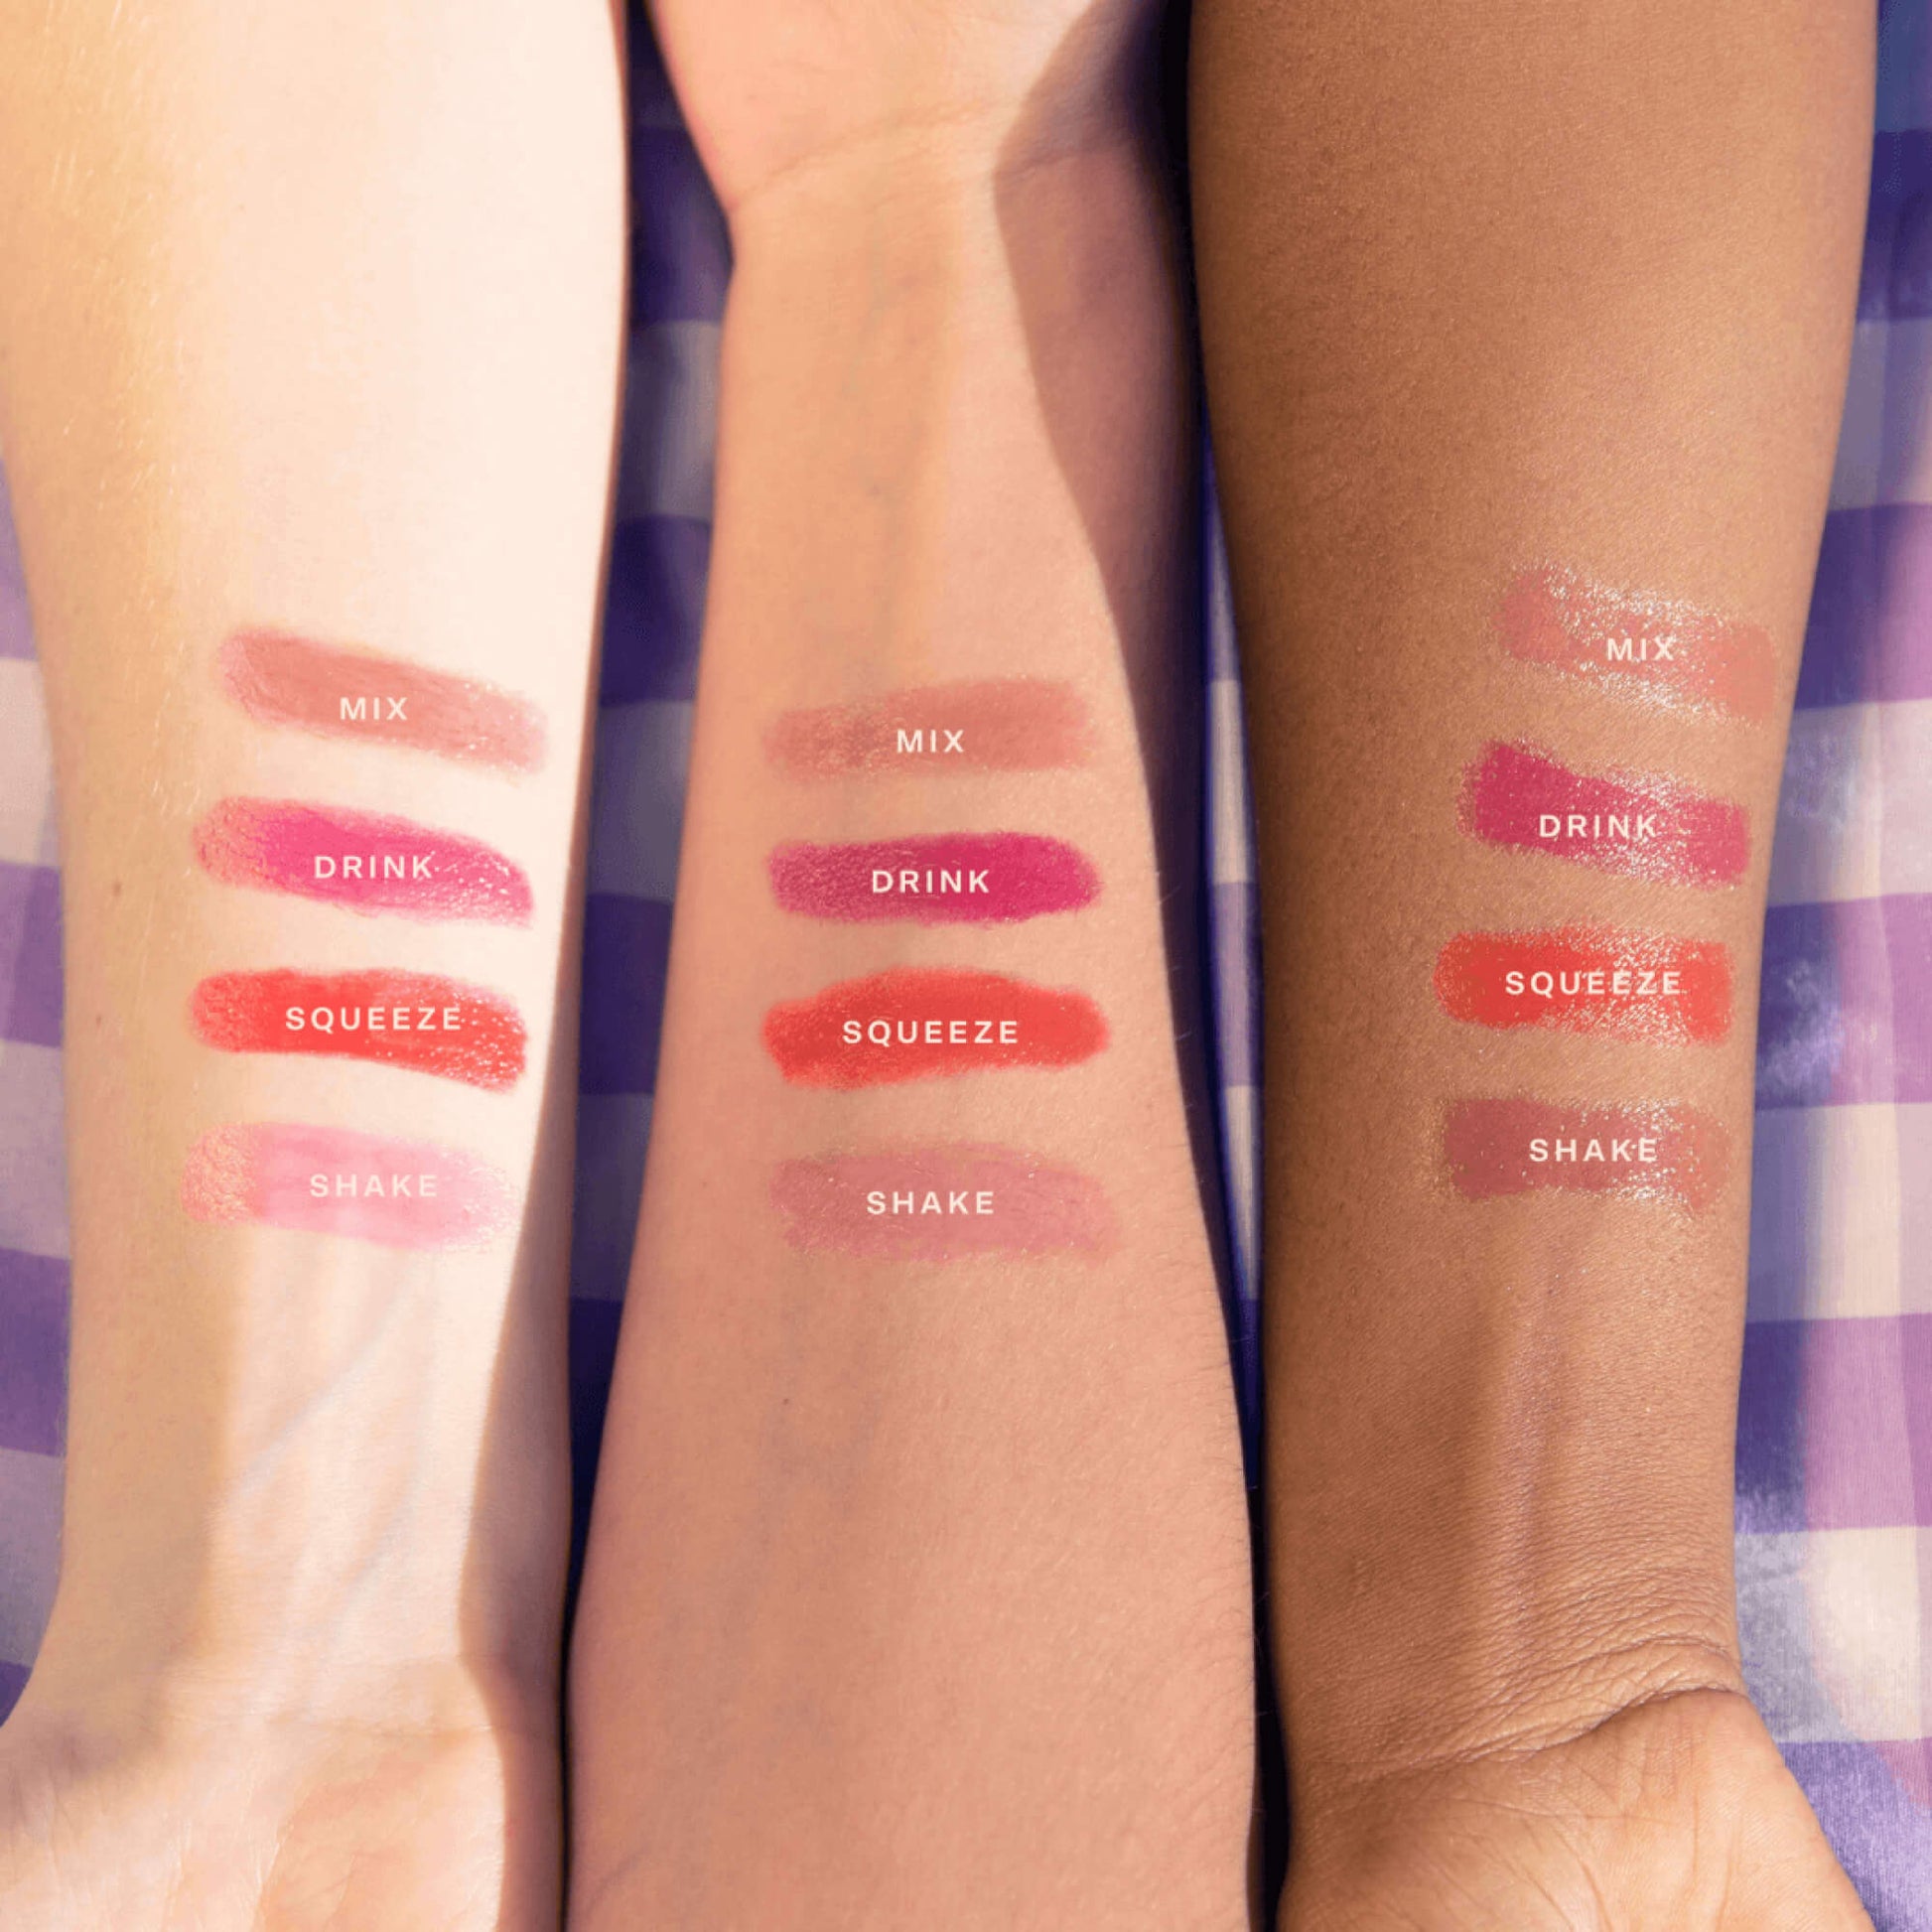 Shared: All shades of Tower 28 Beauty's JuiceBalm swatched on three models with different skin tones (Drink, Shake, Mix, and Squeeze).